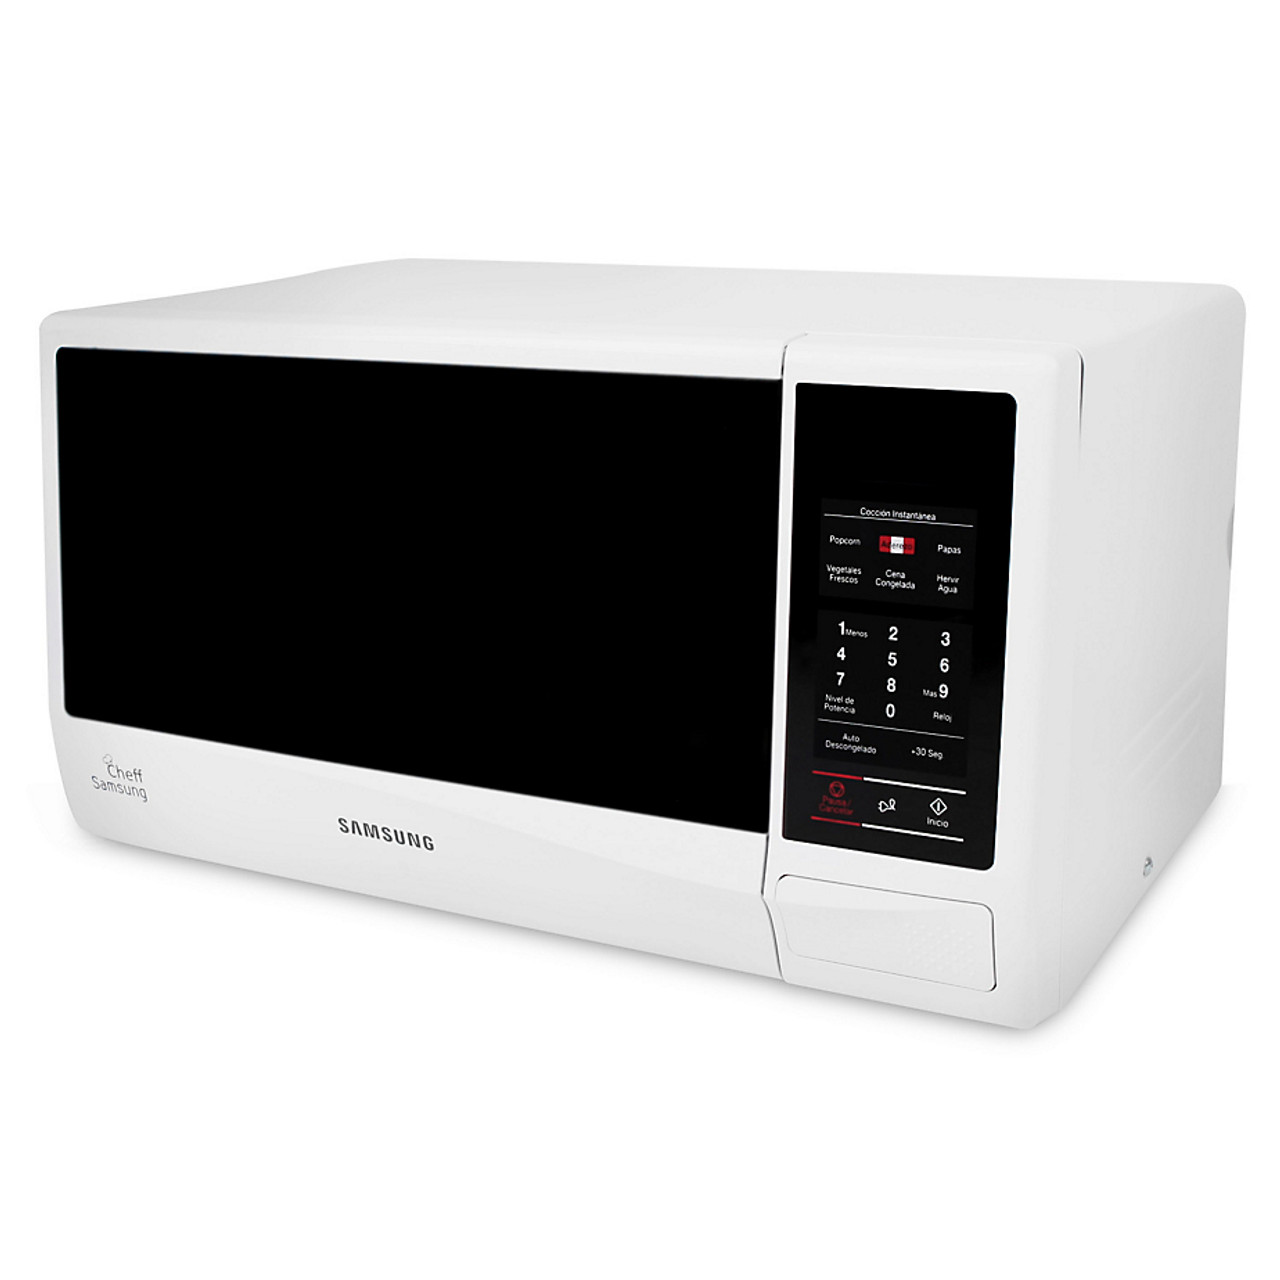 How To Fix The Error Code E-A4 For Samsung Microwave